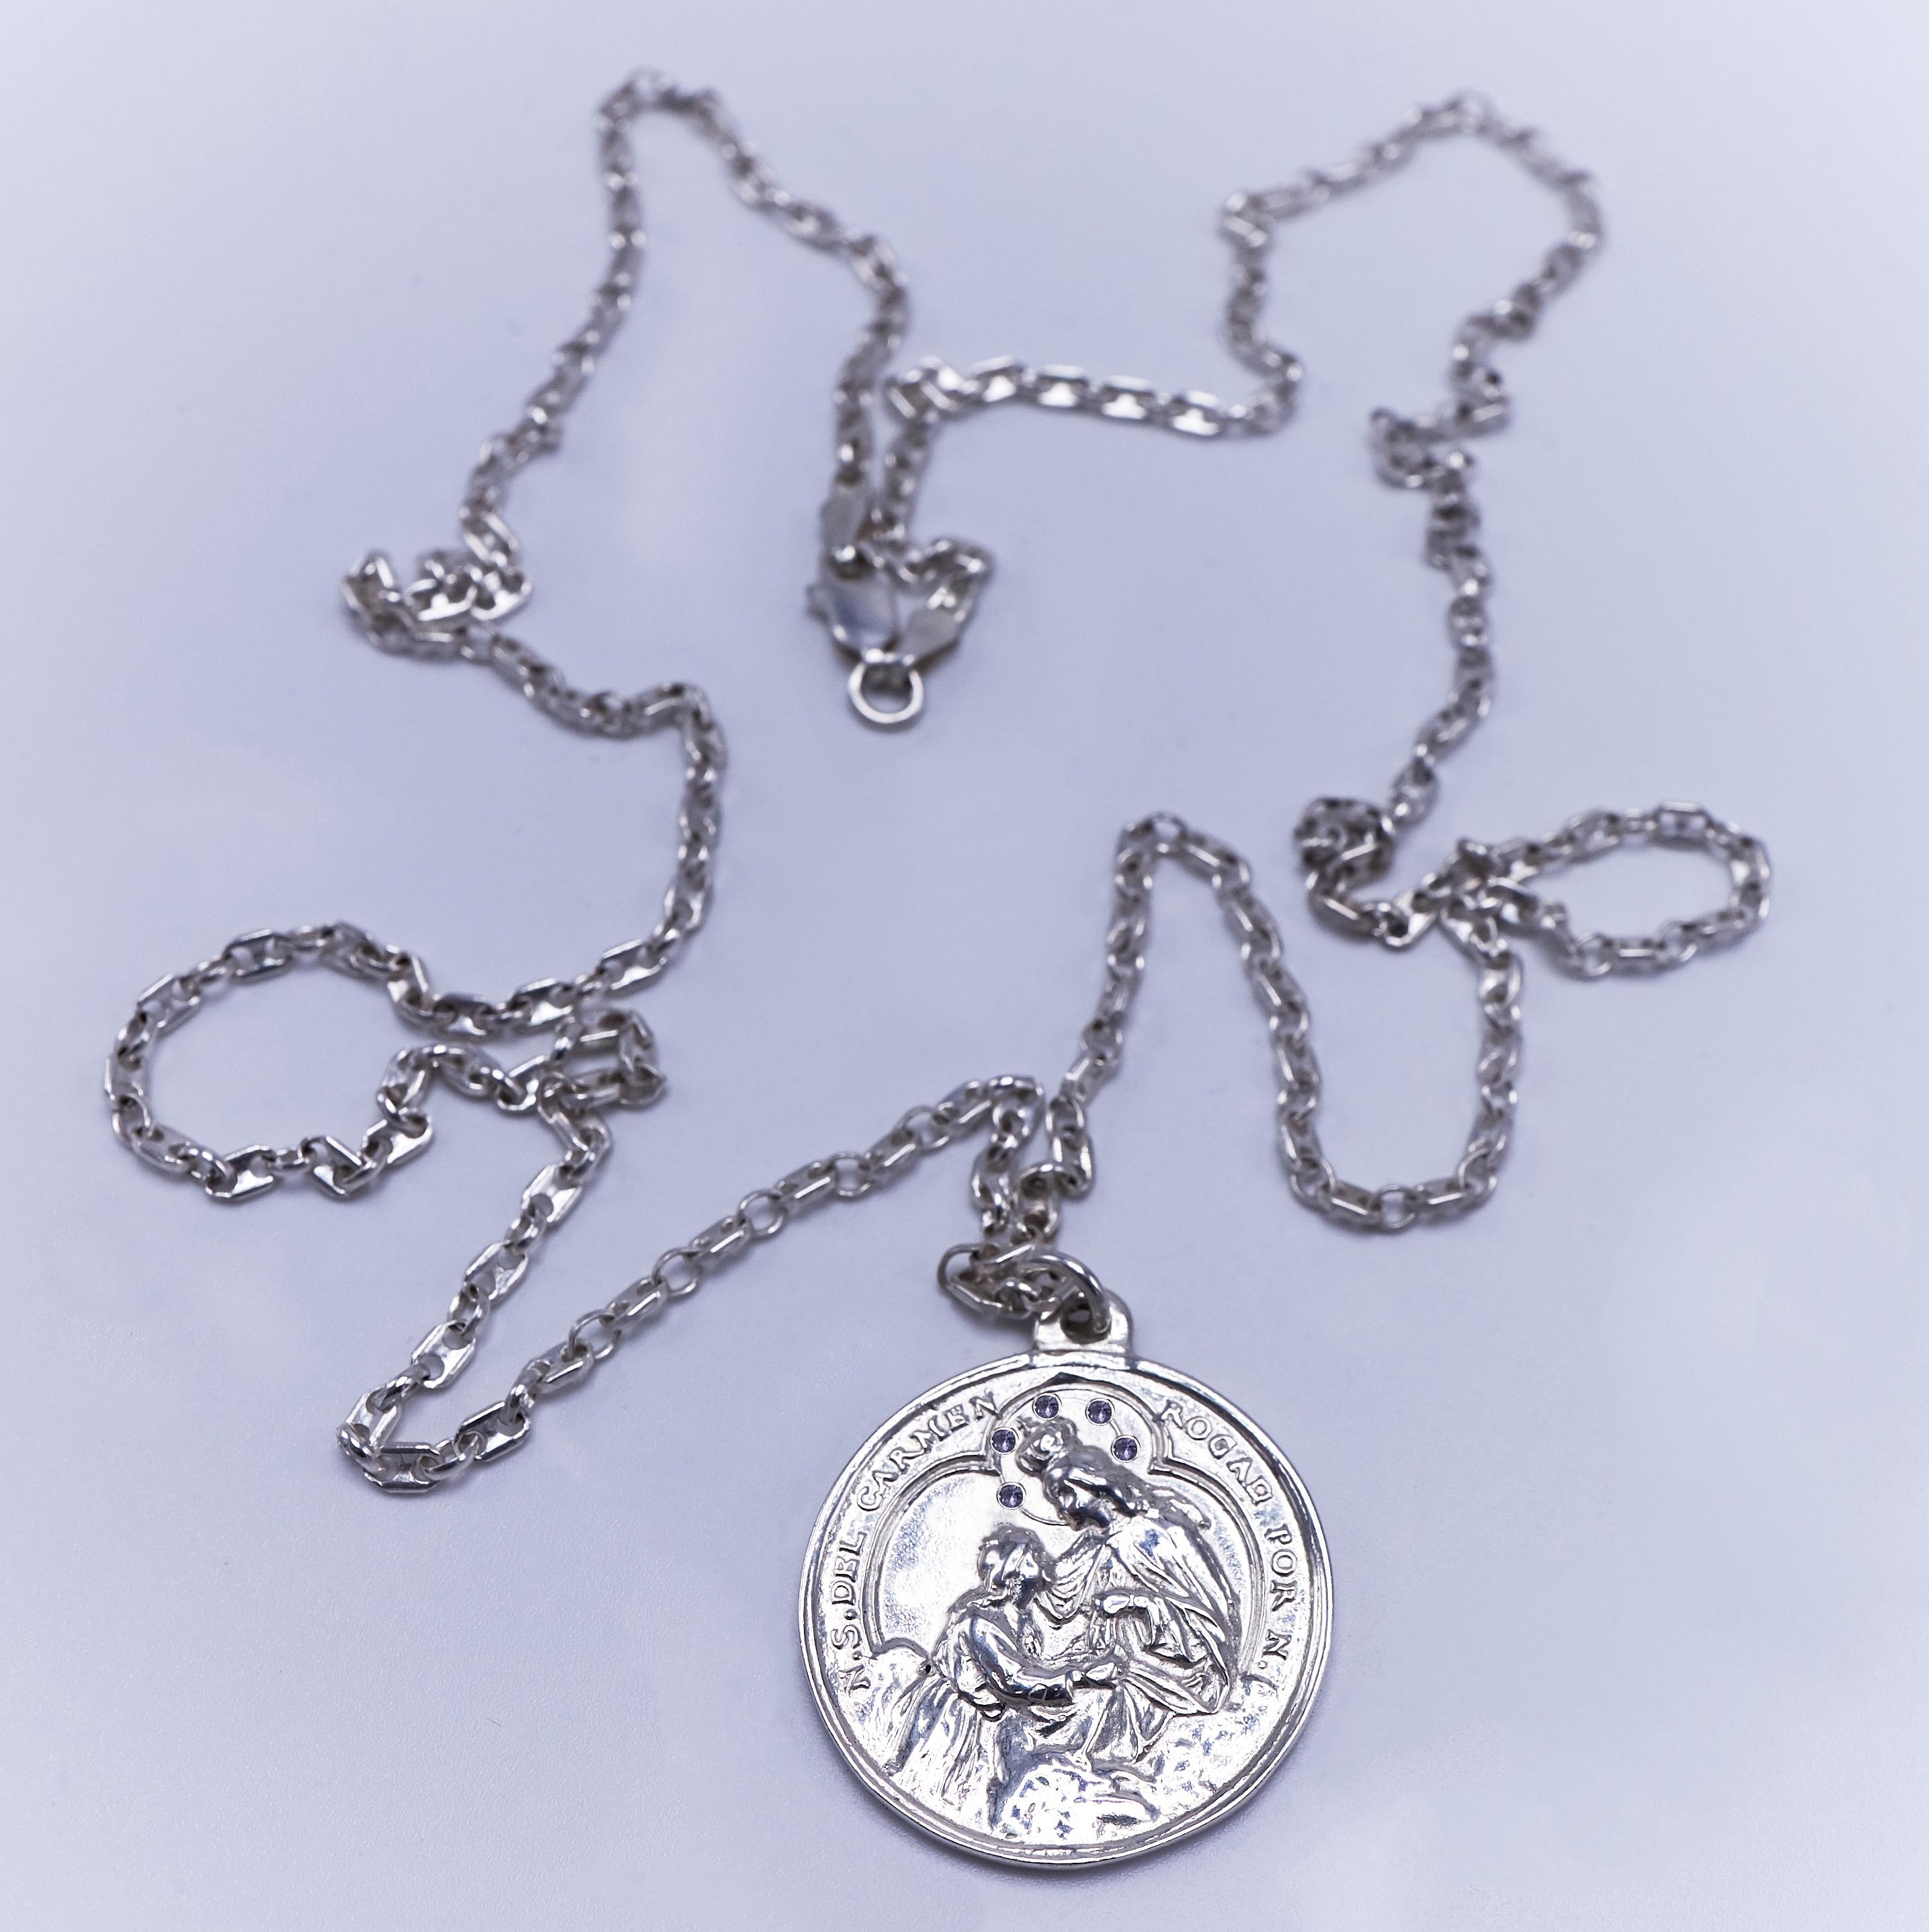 Brilliant Cut Iolite Medal Chain Necklace Miraculous Virgin Mary Silver J Dauphin For Sale